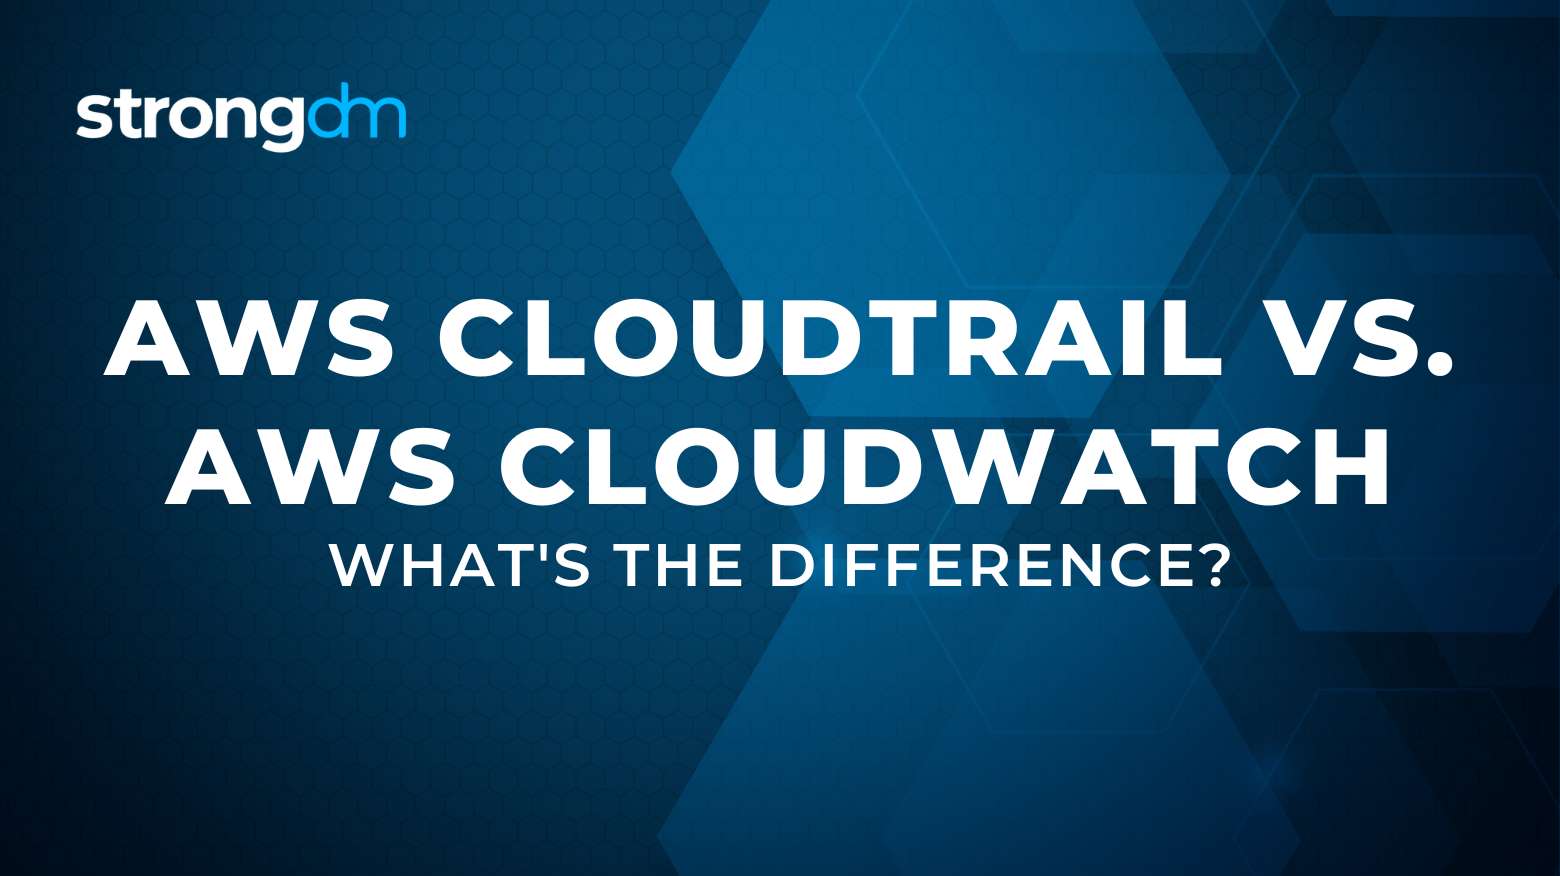 AWS CloudTrail vs. AWS CloudWatch: What's the Difference?